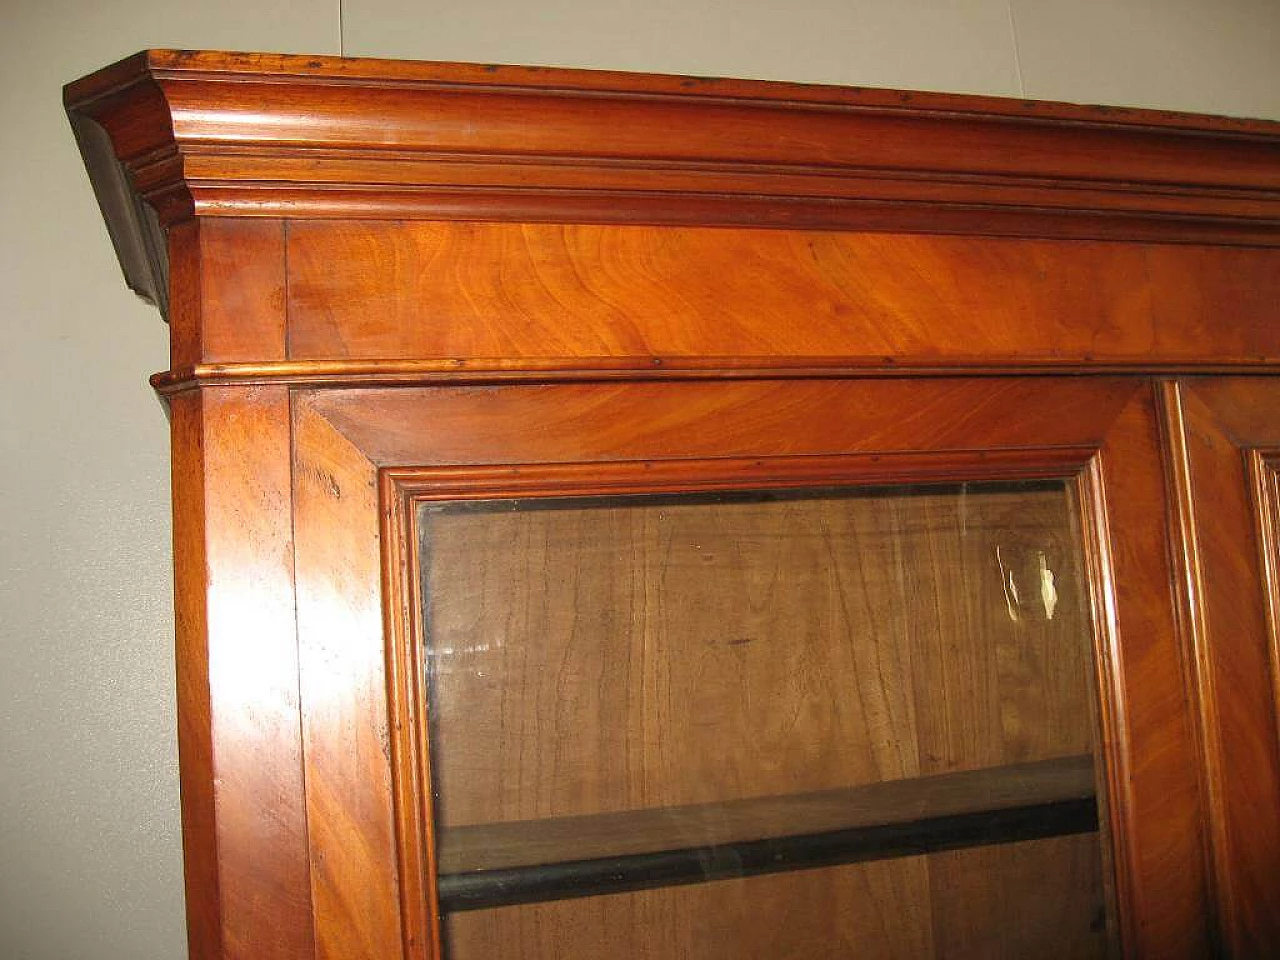 Two-body sideboard in mahogany and glass, 10s 1217693